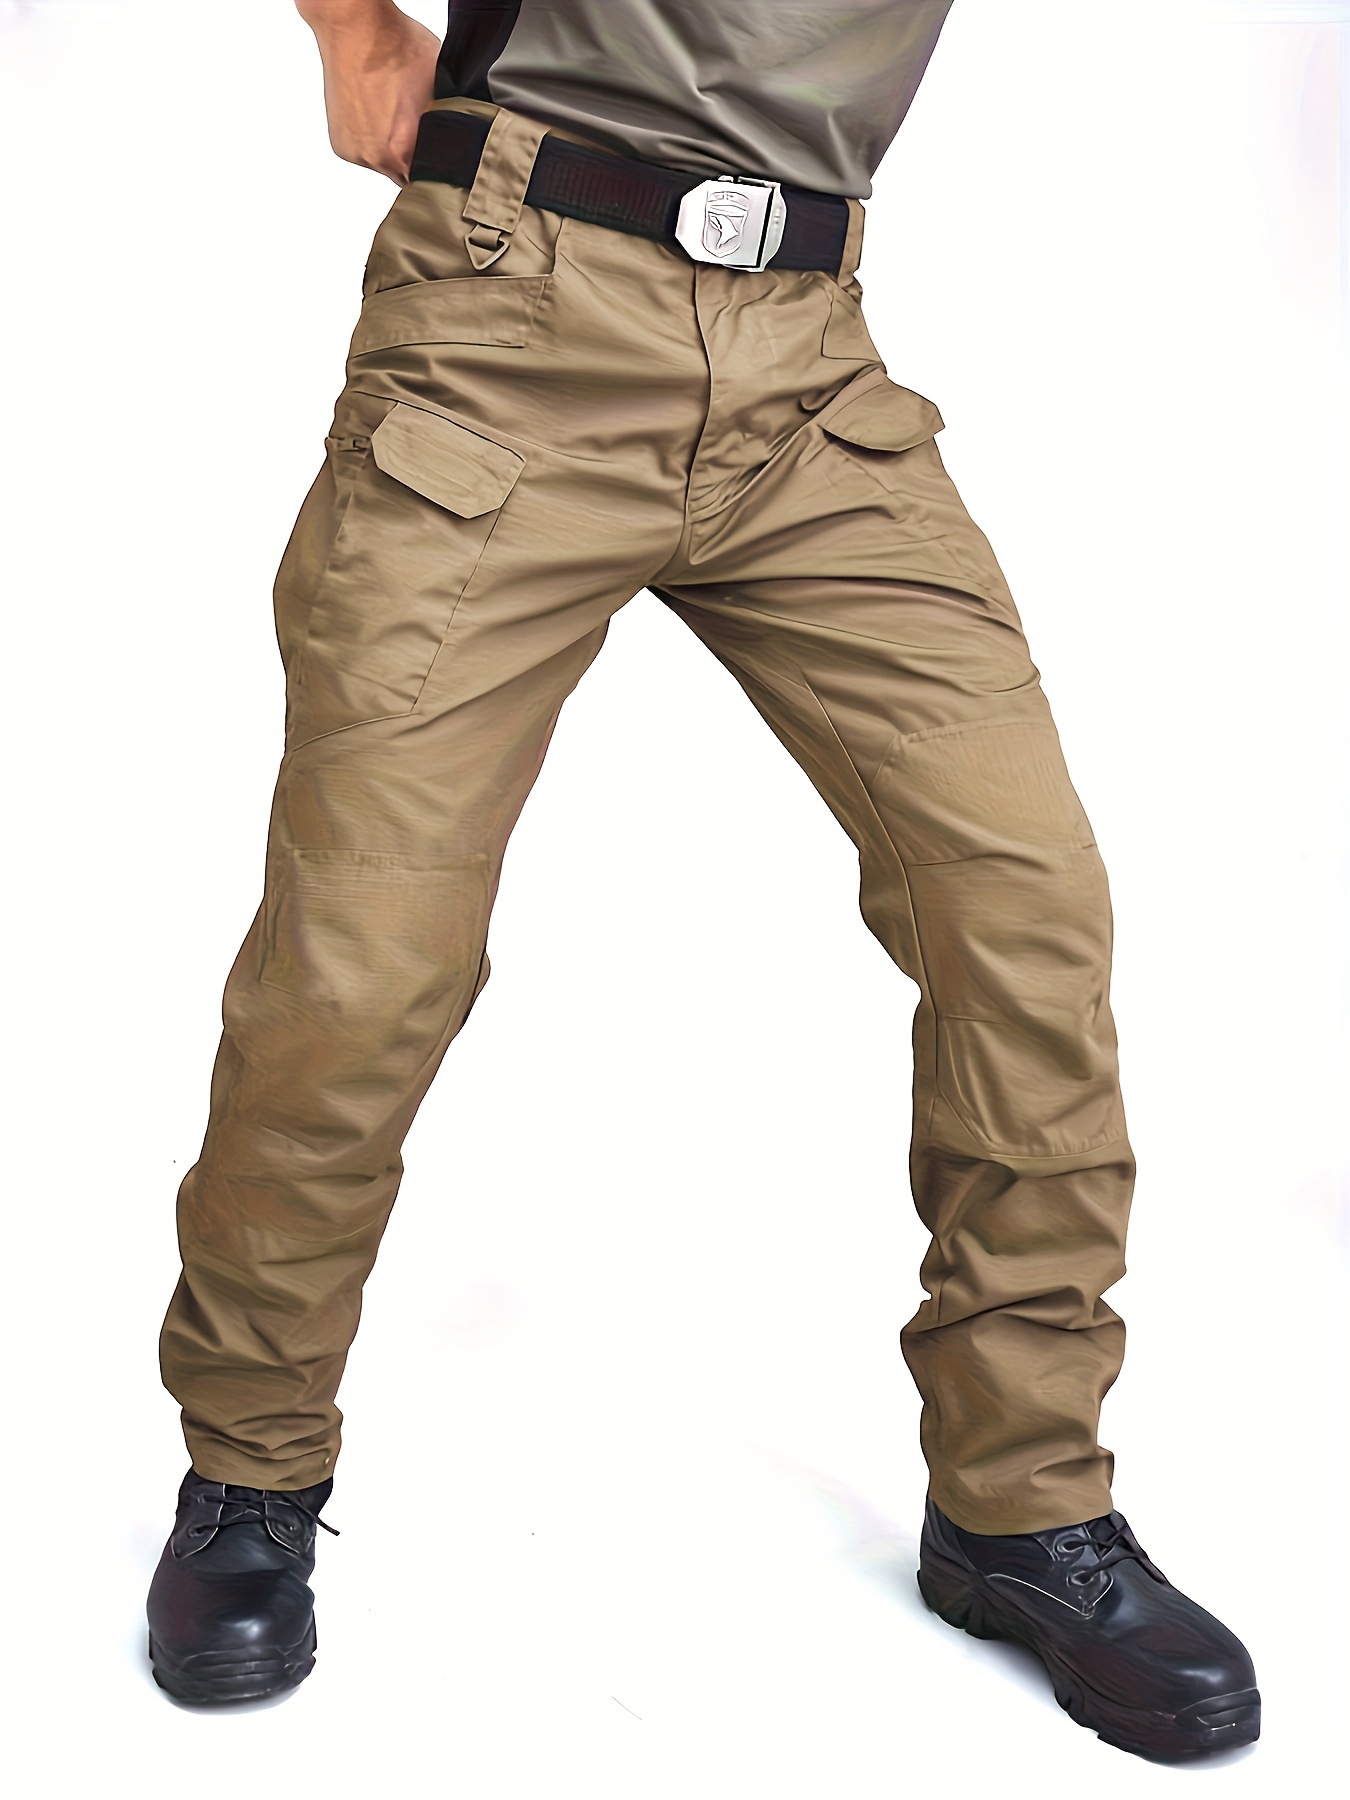 FREE SOLDIER Hiking Pants for Men Quick Dry Cargo Pants Outdoor